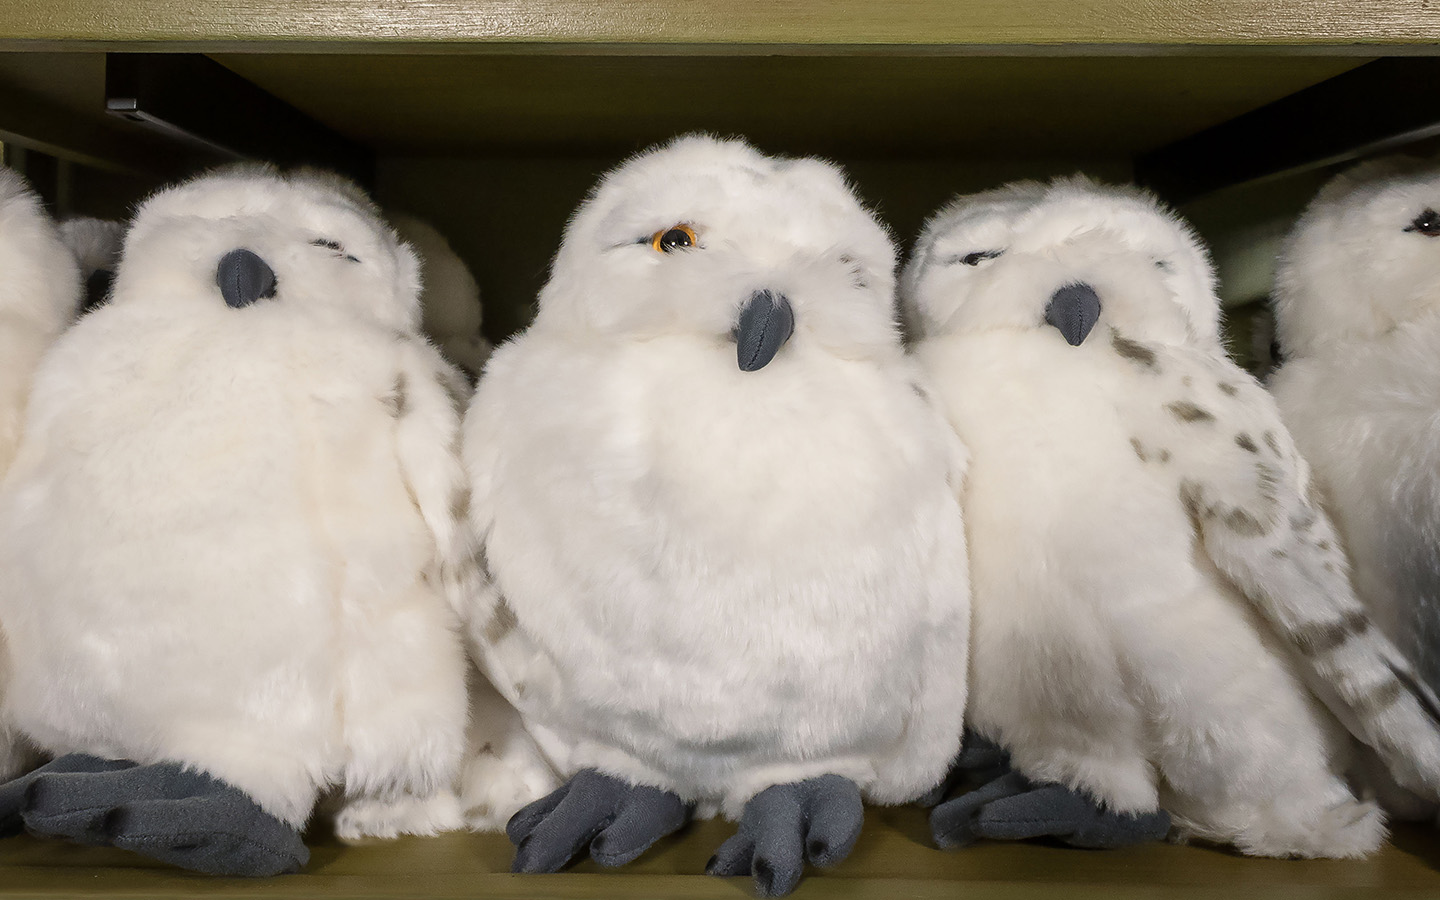 Owl Plushes from The Wizarding World of Harry Potter